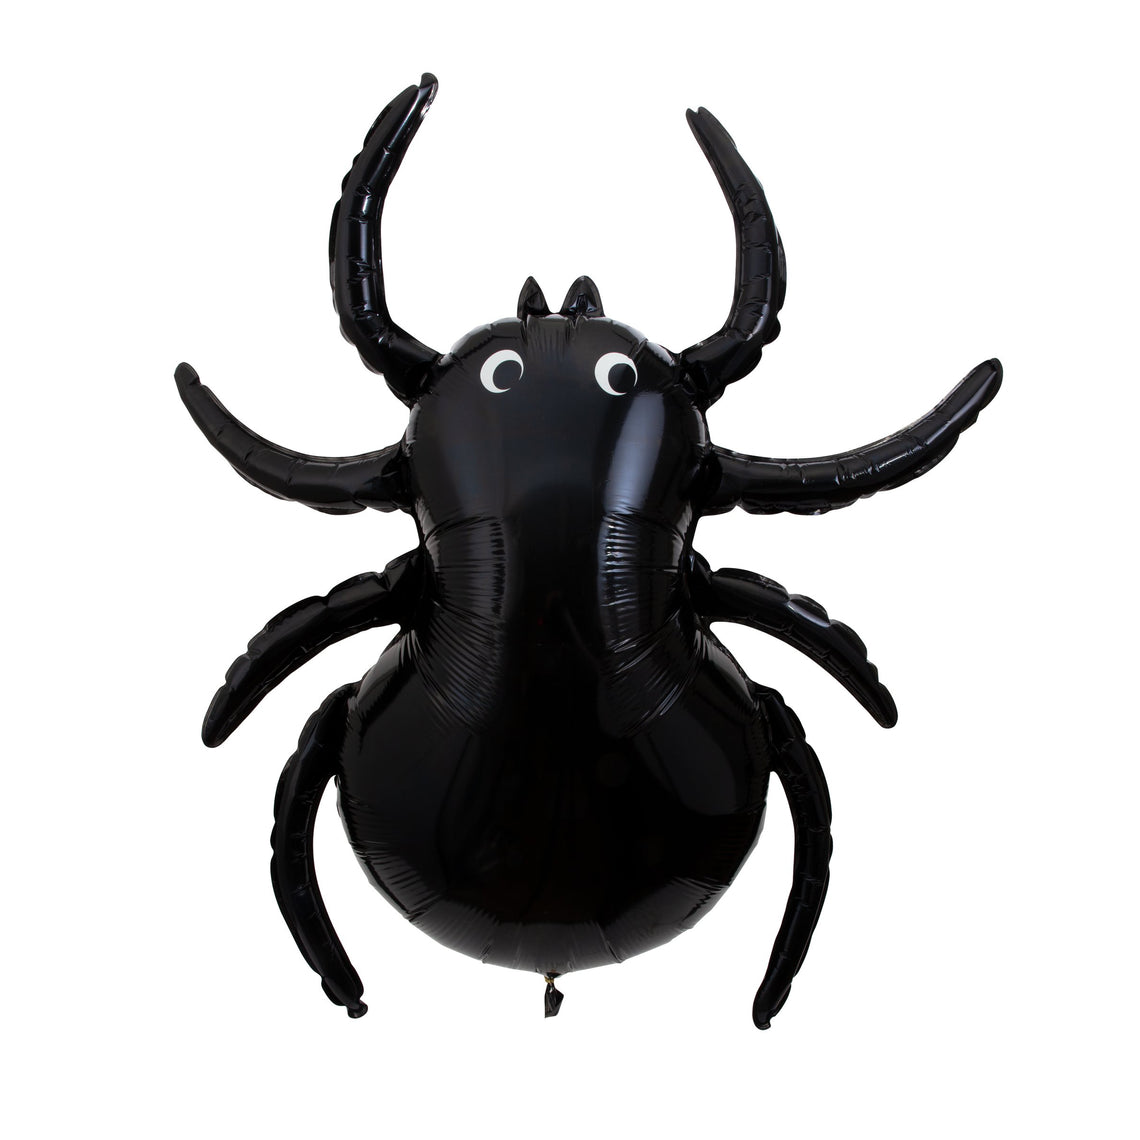 Giant Spider Balloons (3 Pack)